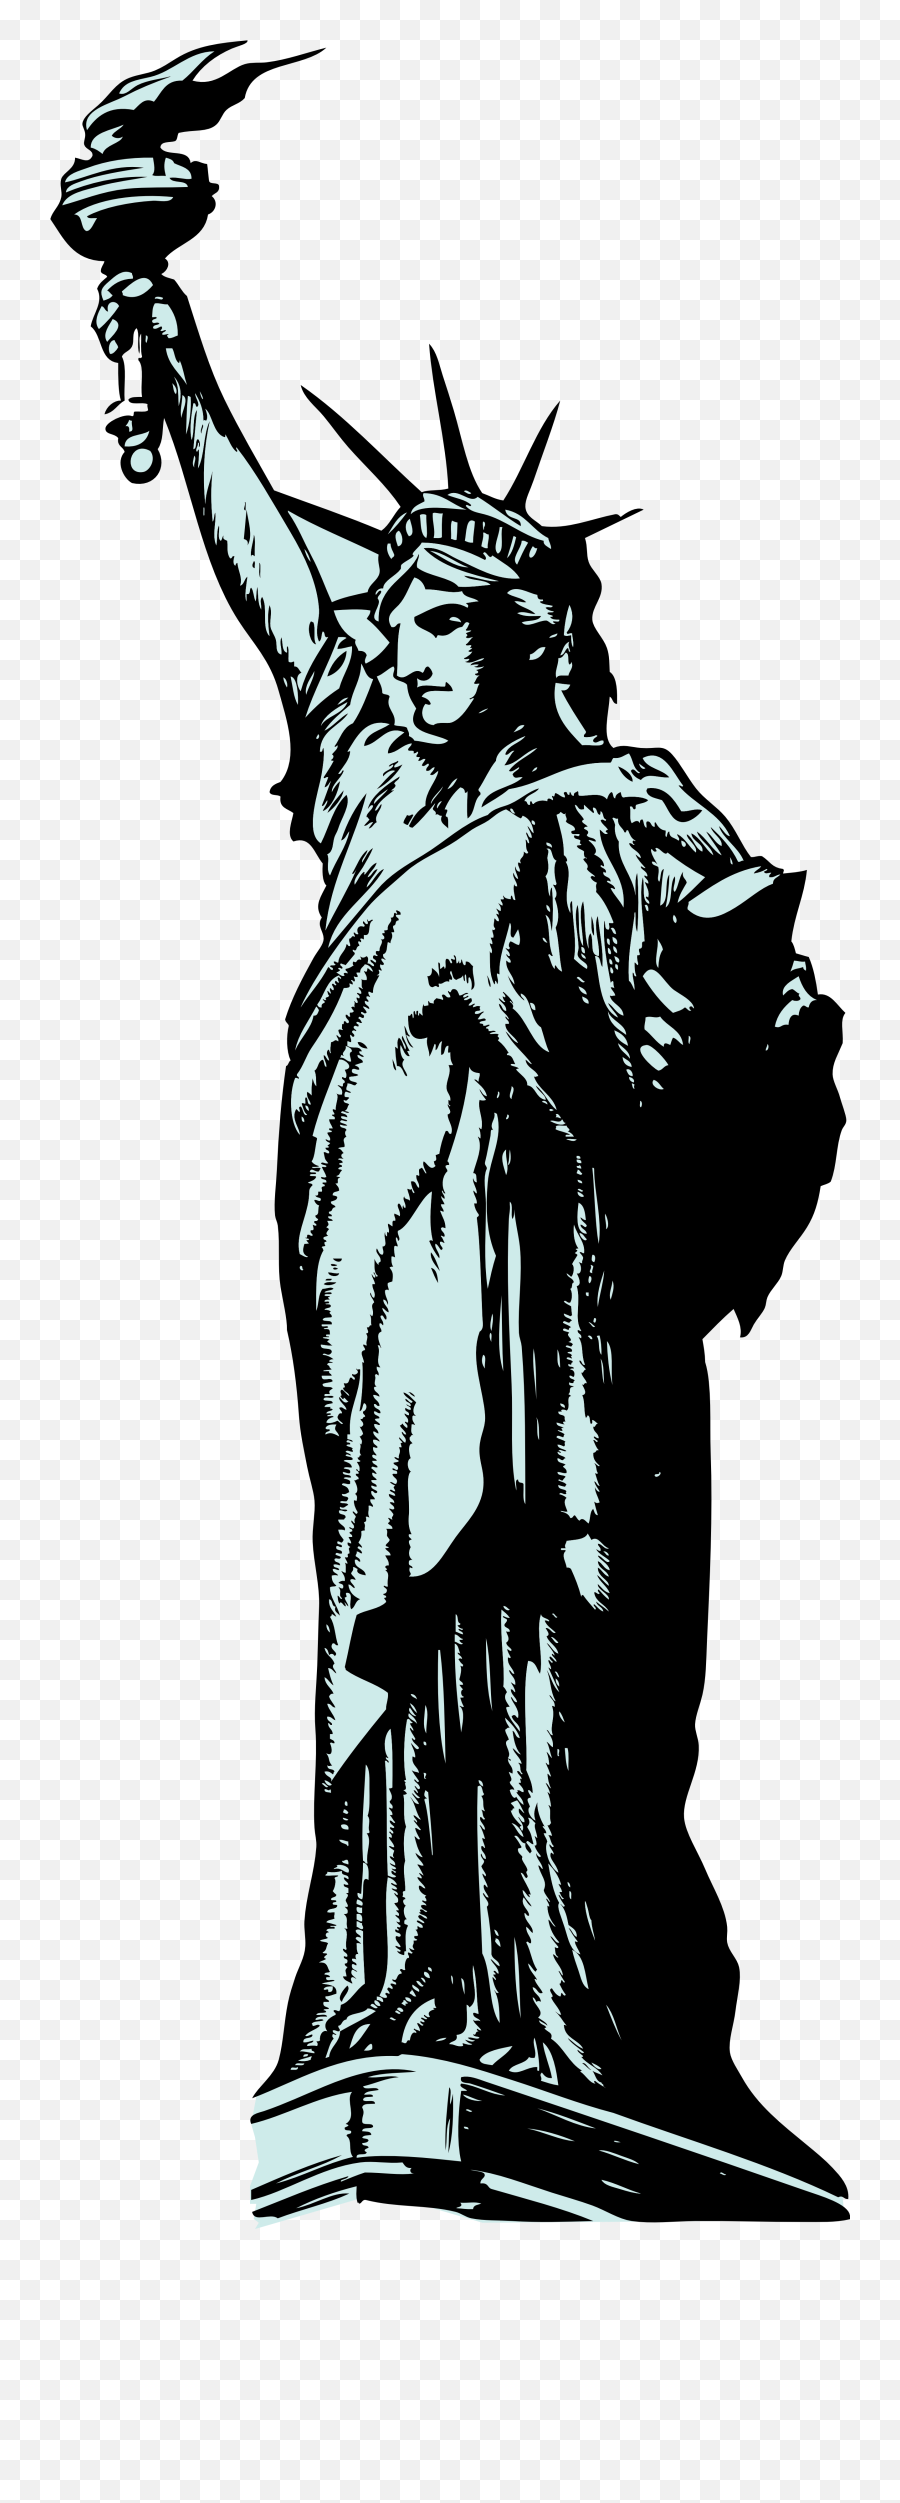 Painted Statue Of Liberty On A White Background Free Image - Statue Of Liberty Artwork Png Emoji,Statue Of Liberty Emotions Of Surprised